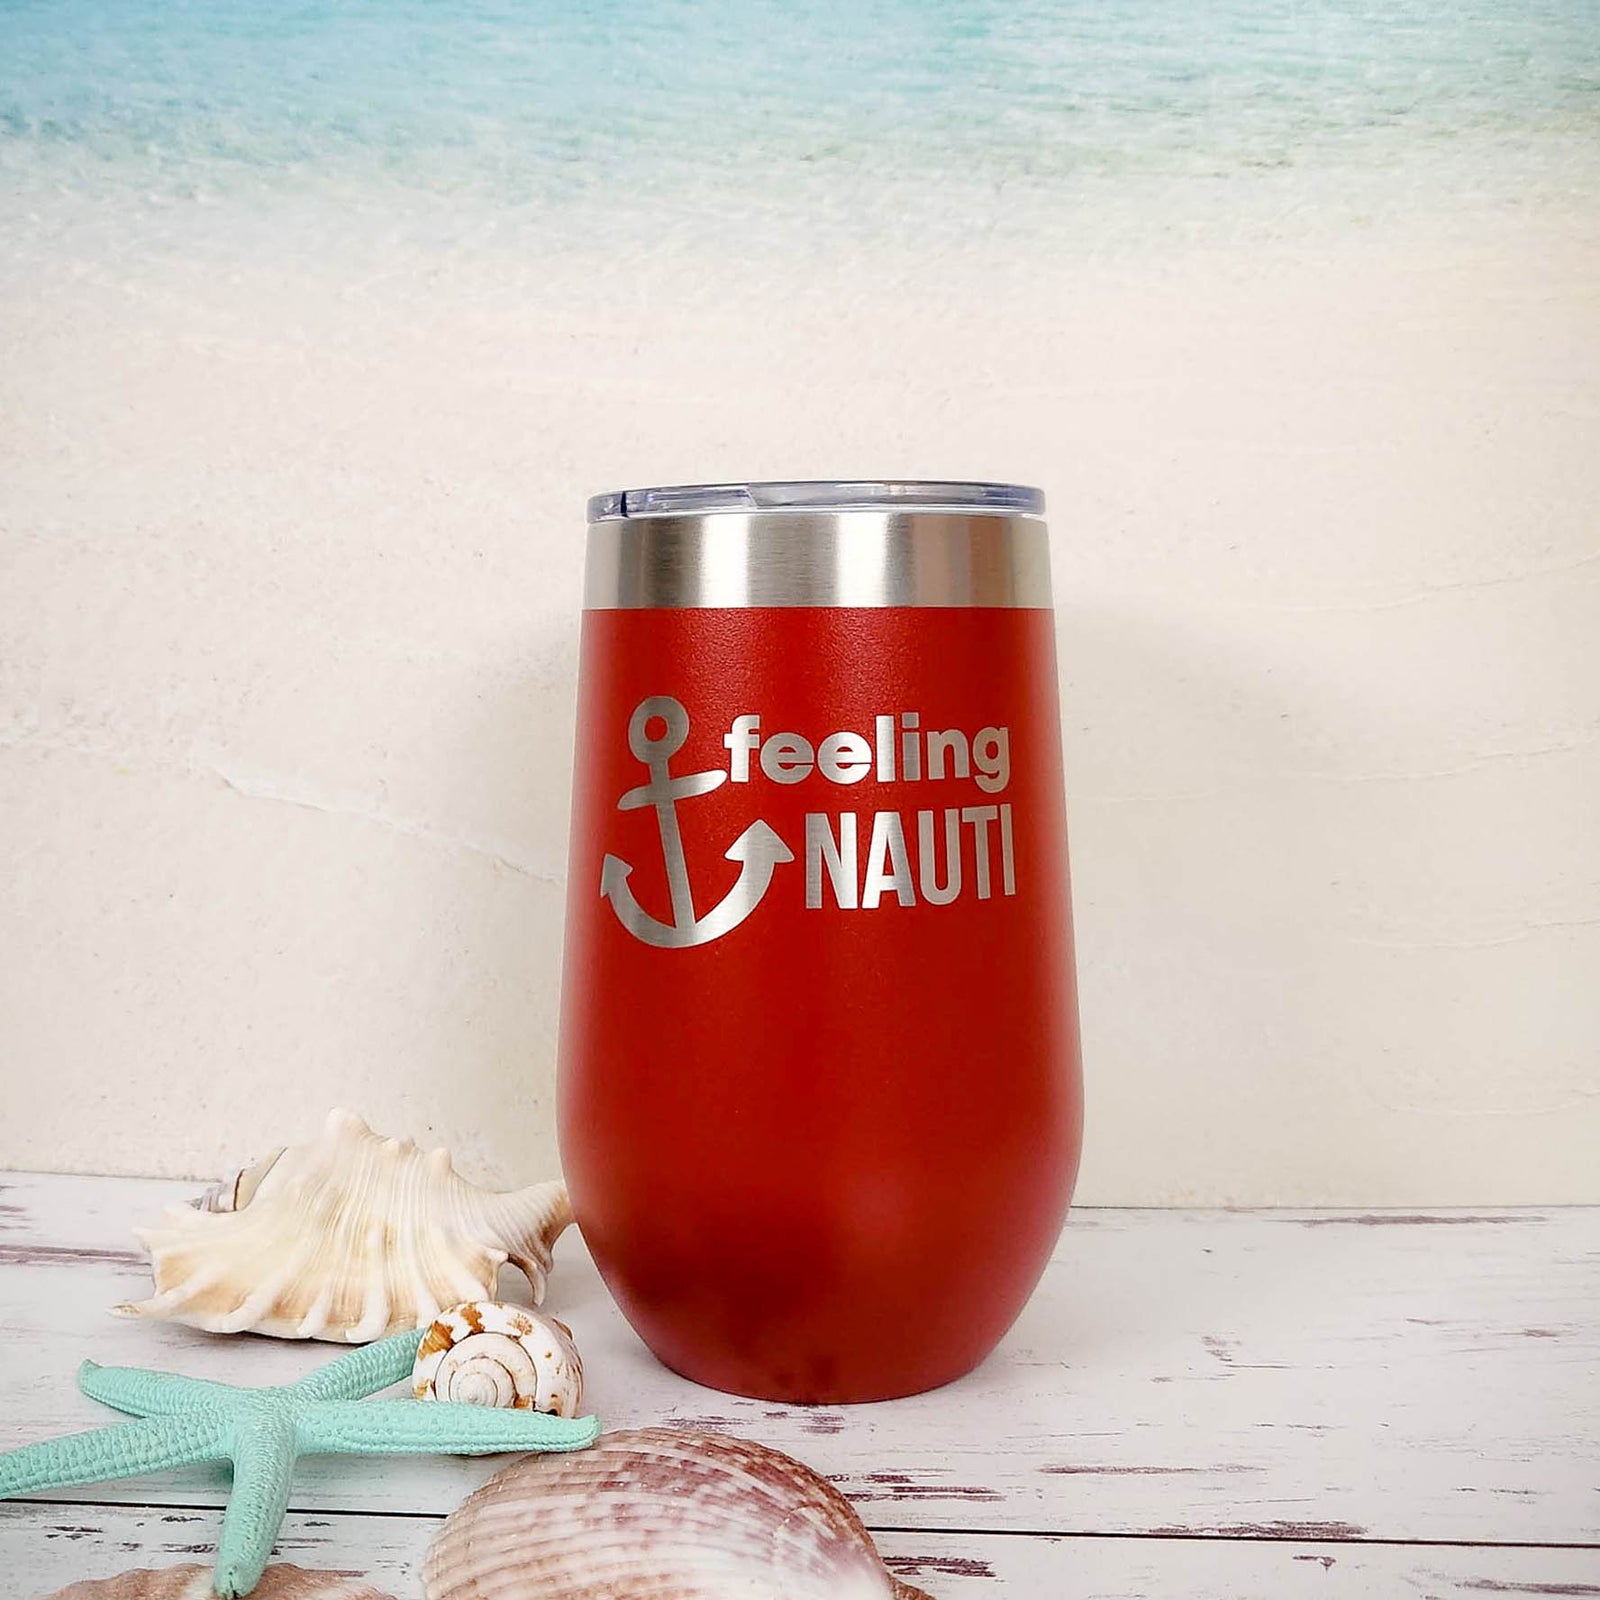 YETI - Personalized ANCHOR - Laser Engraved Tumblers, Can Colsters